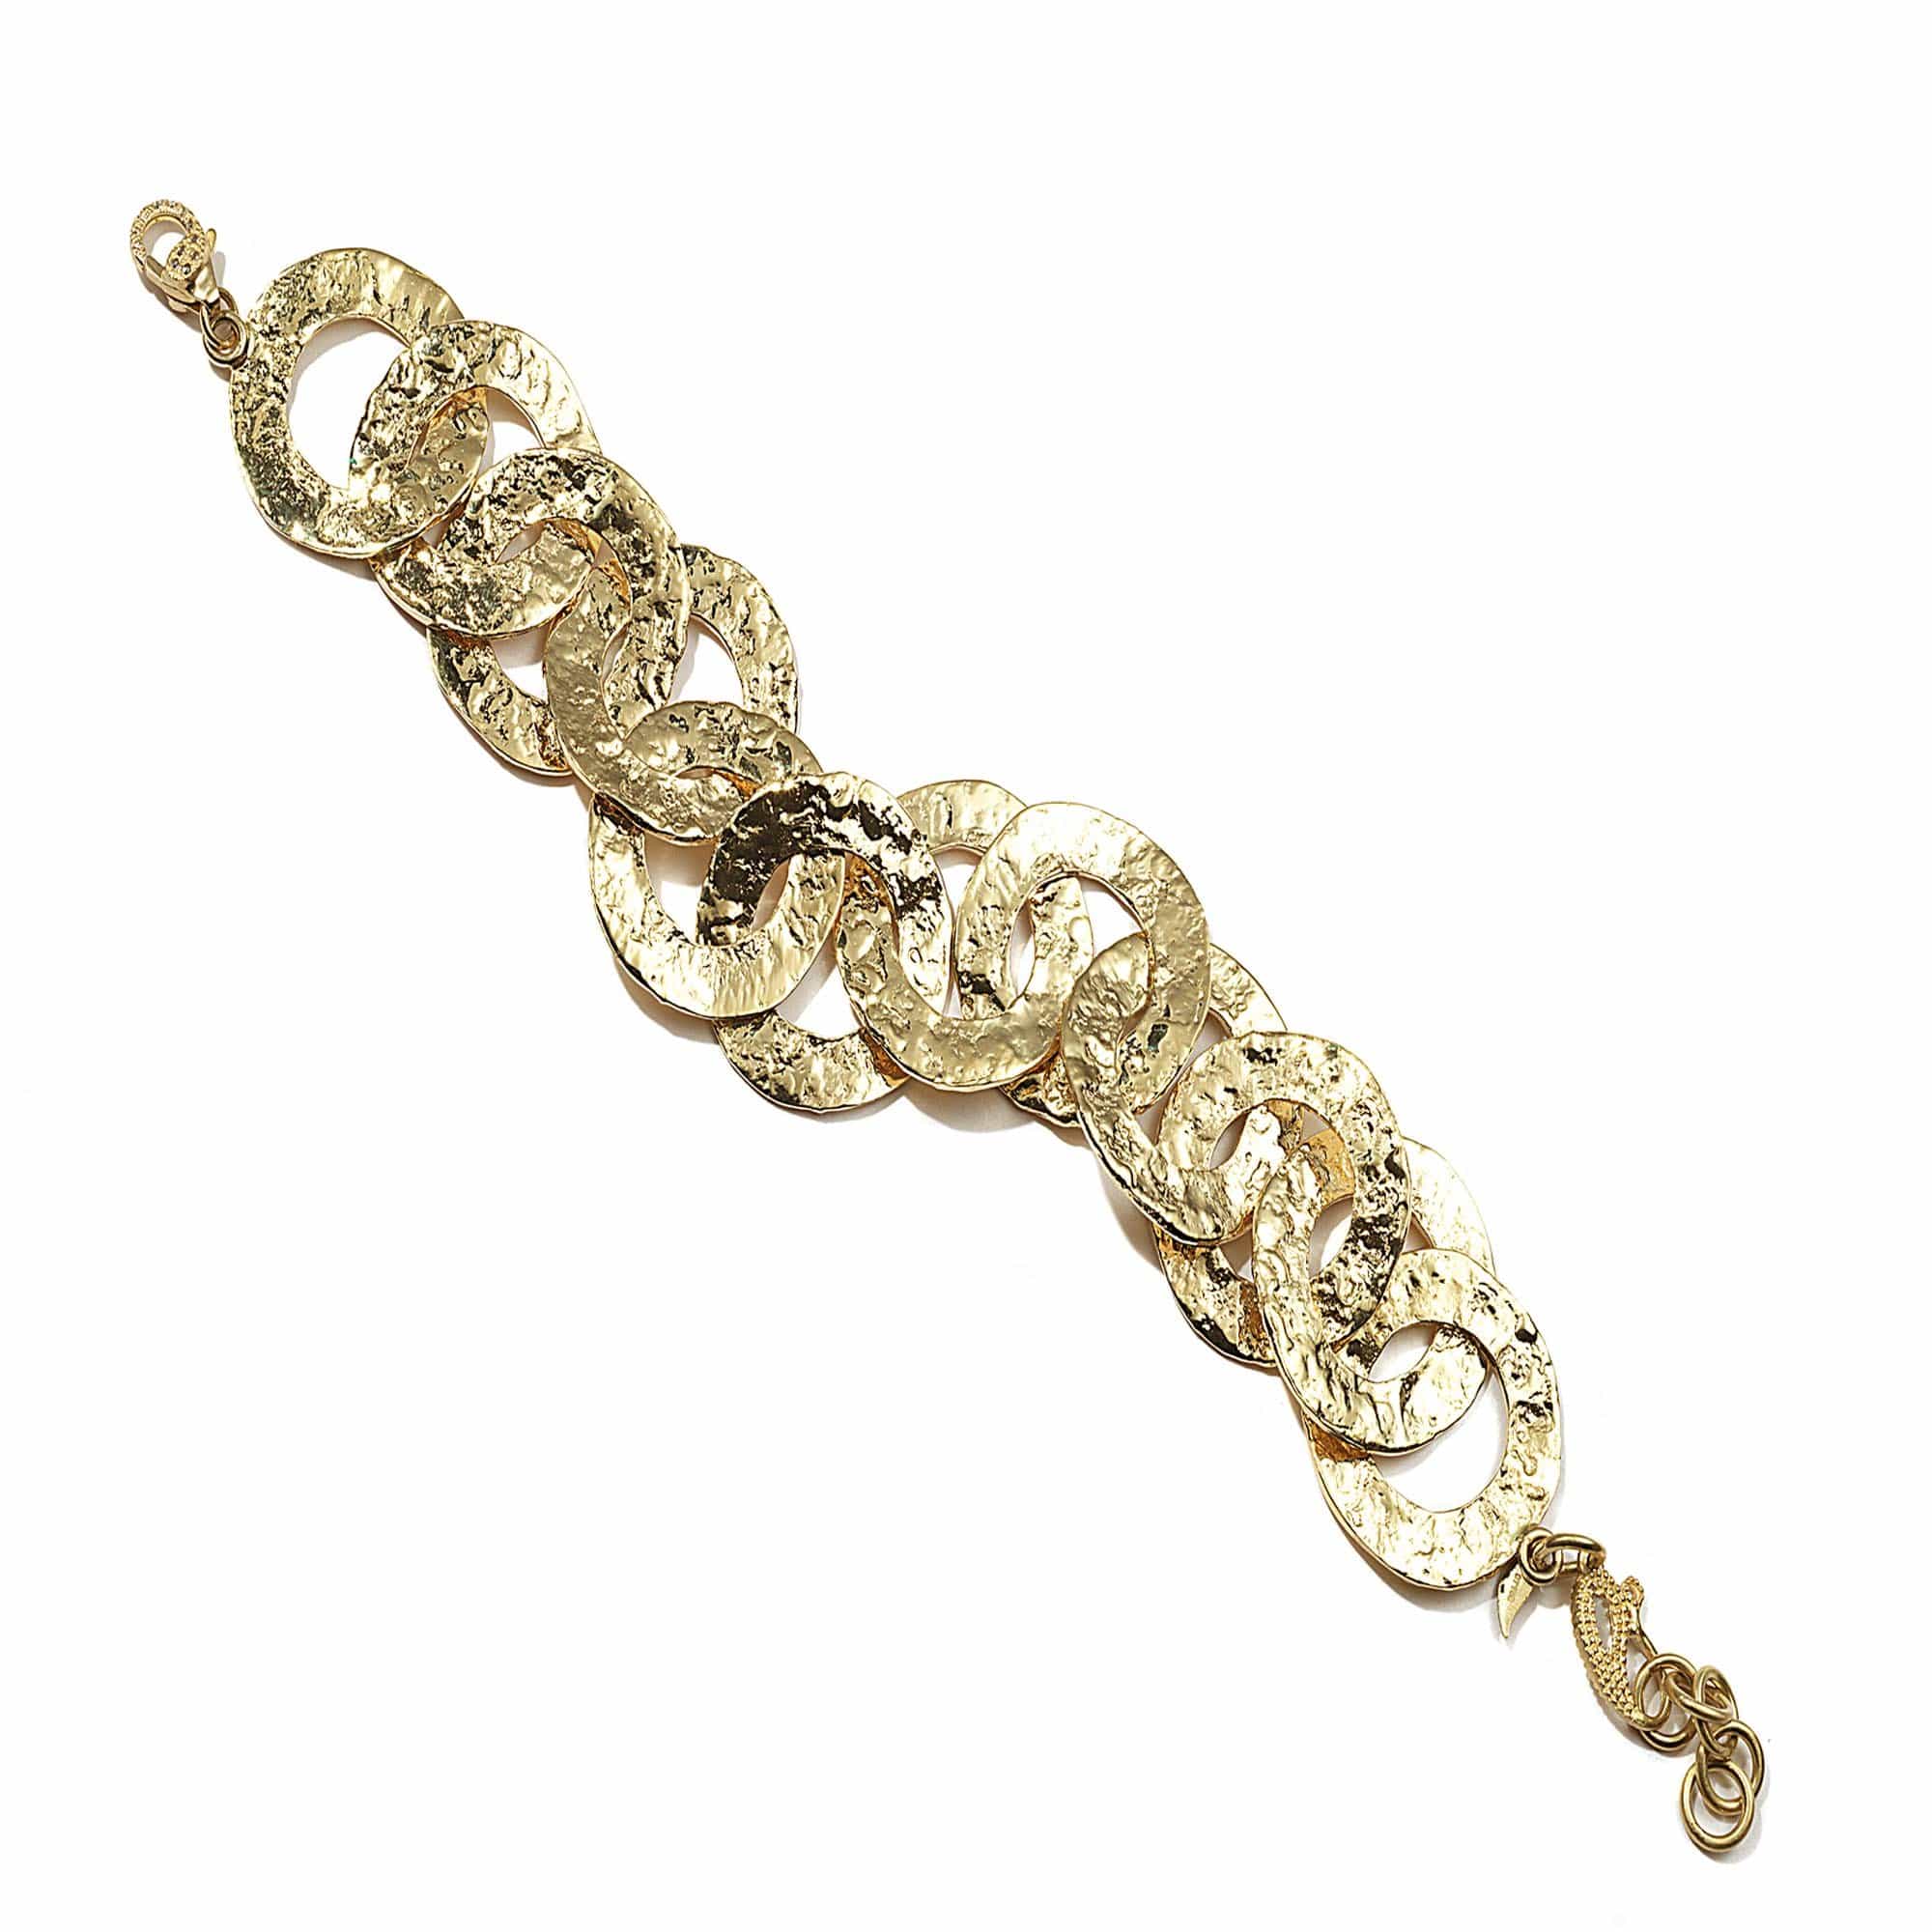 Serenity Bracelet in 20K with Open Flower Design and Diamonds - Coomi